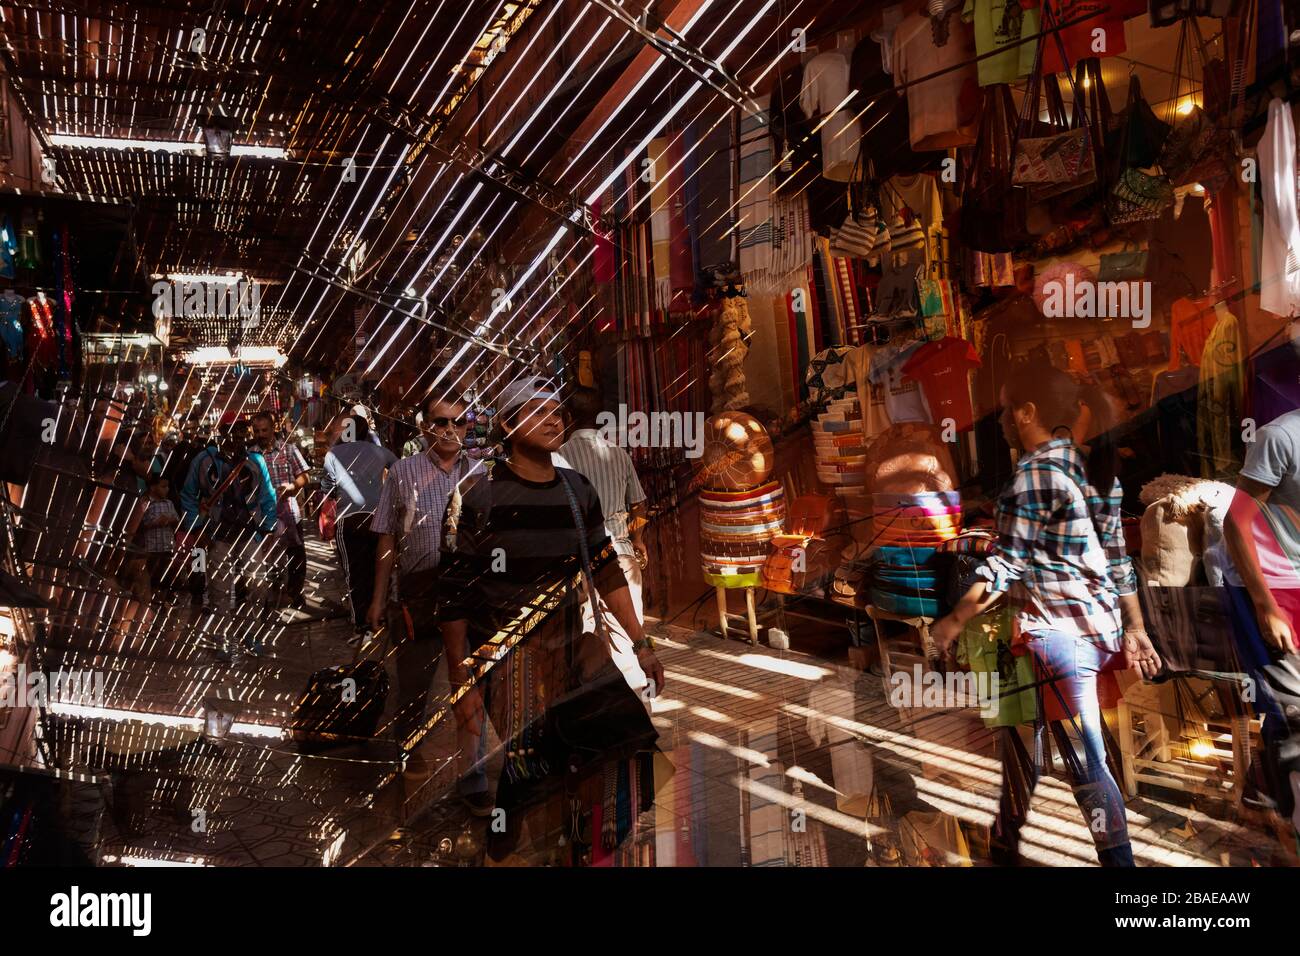 Busy street scene inside the medina, old town, with people shopping, November 6, 2017, Marrakech, Morocco. Double exposure image. Stock Photo